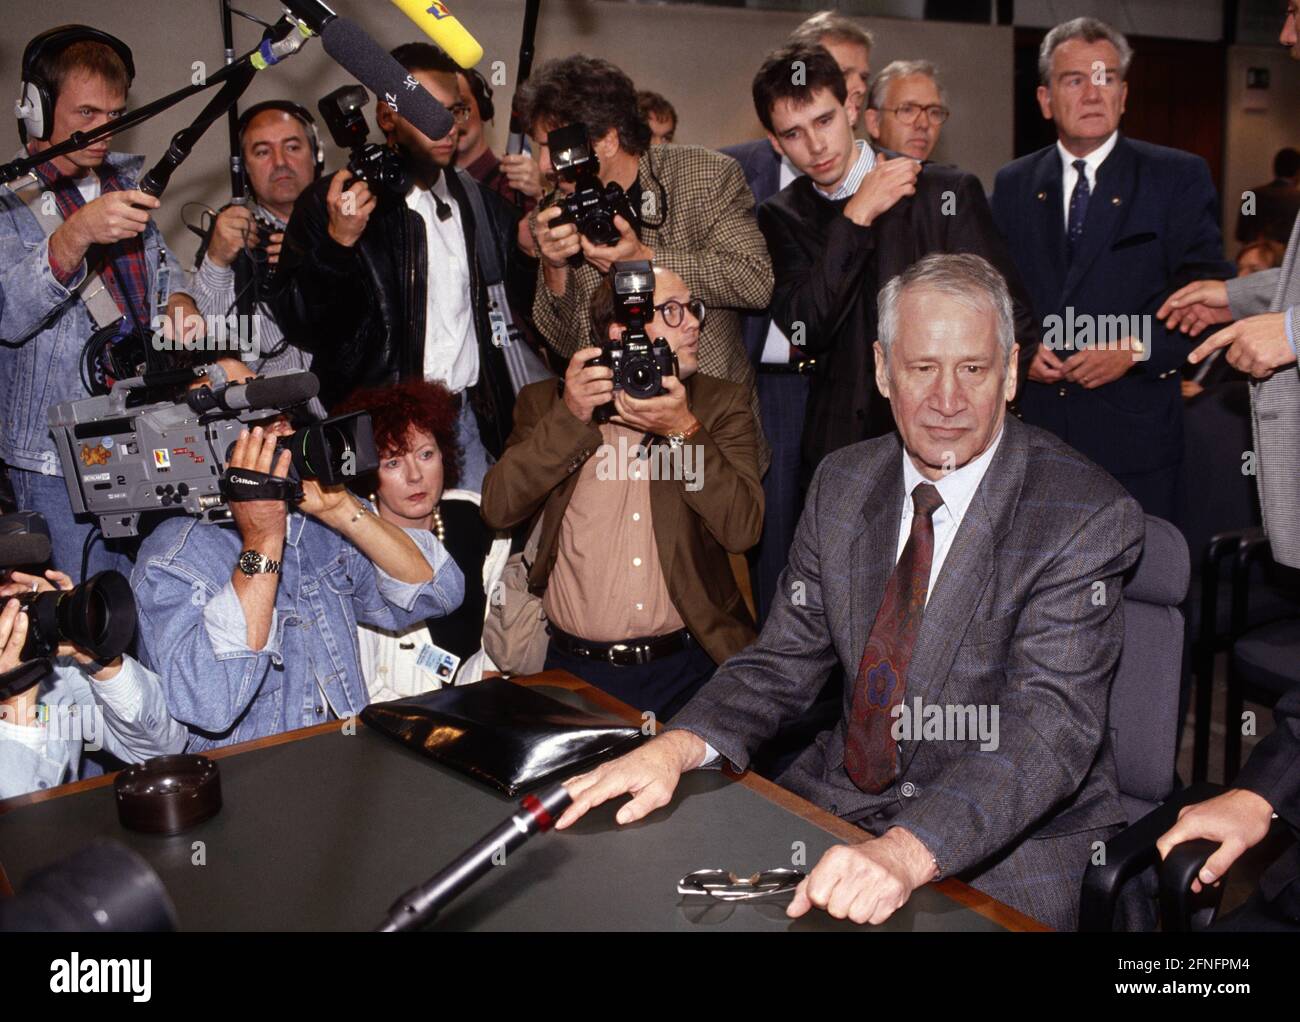 Markus WOLF , former head of the foreign intelligence service of the GDR, before the investigating committee of the Bundestag in September 1992 [automated translation] Stock Photo